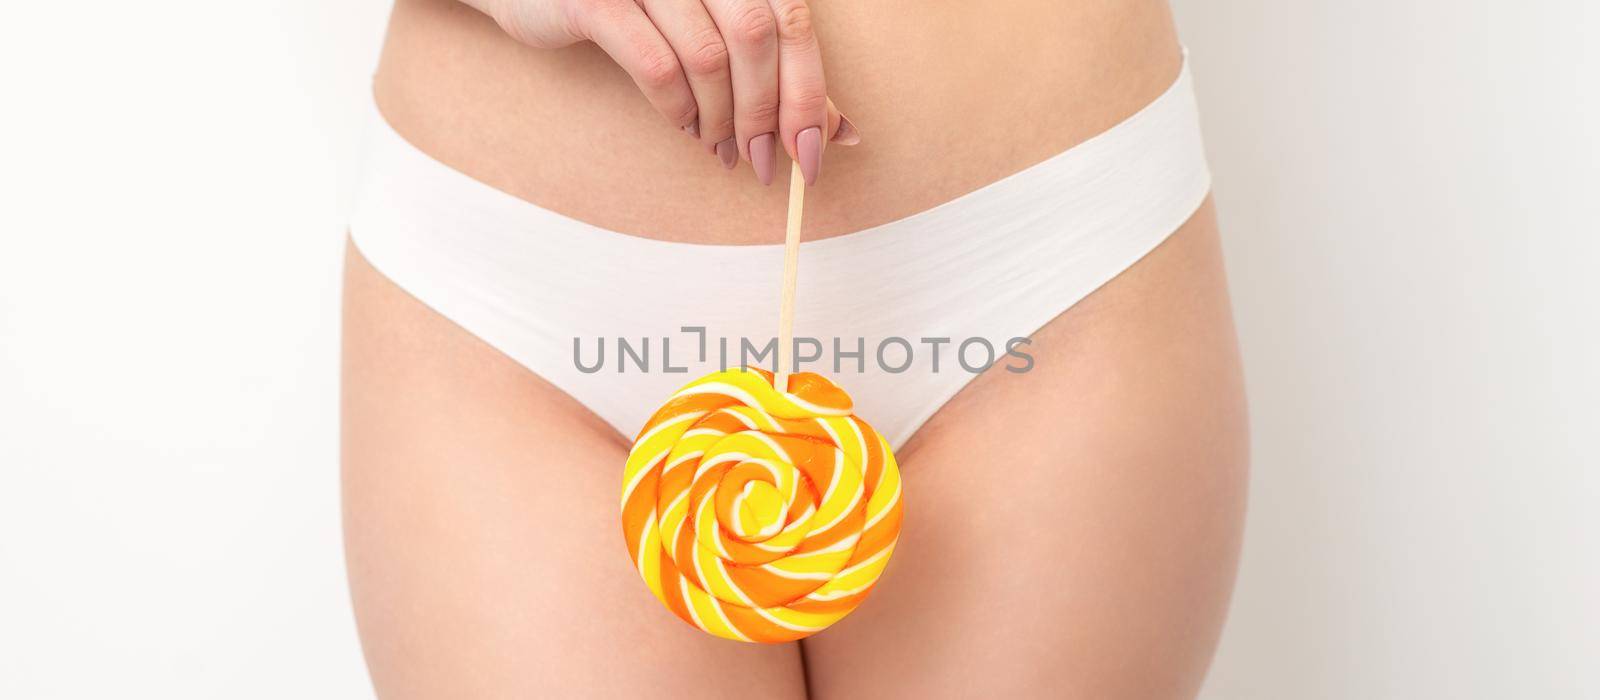 Hand of a woman wearing white panties holding lollipop on a stick covering the intimate area, the concept of intimate depilation, problems of intimate hygiene